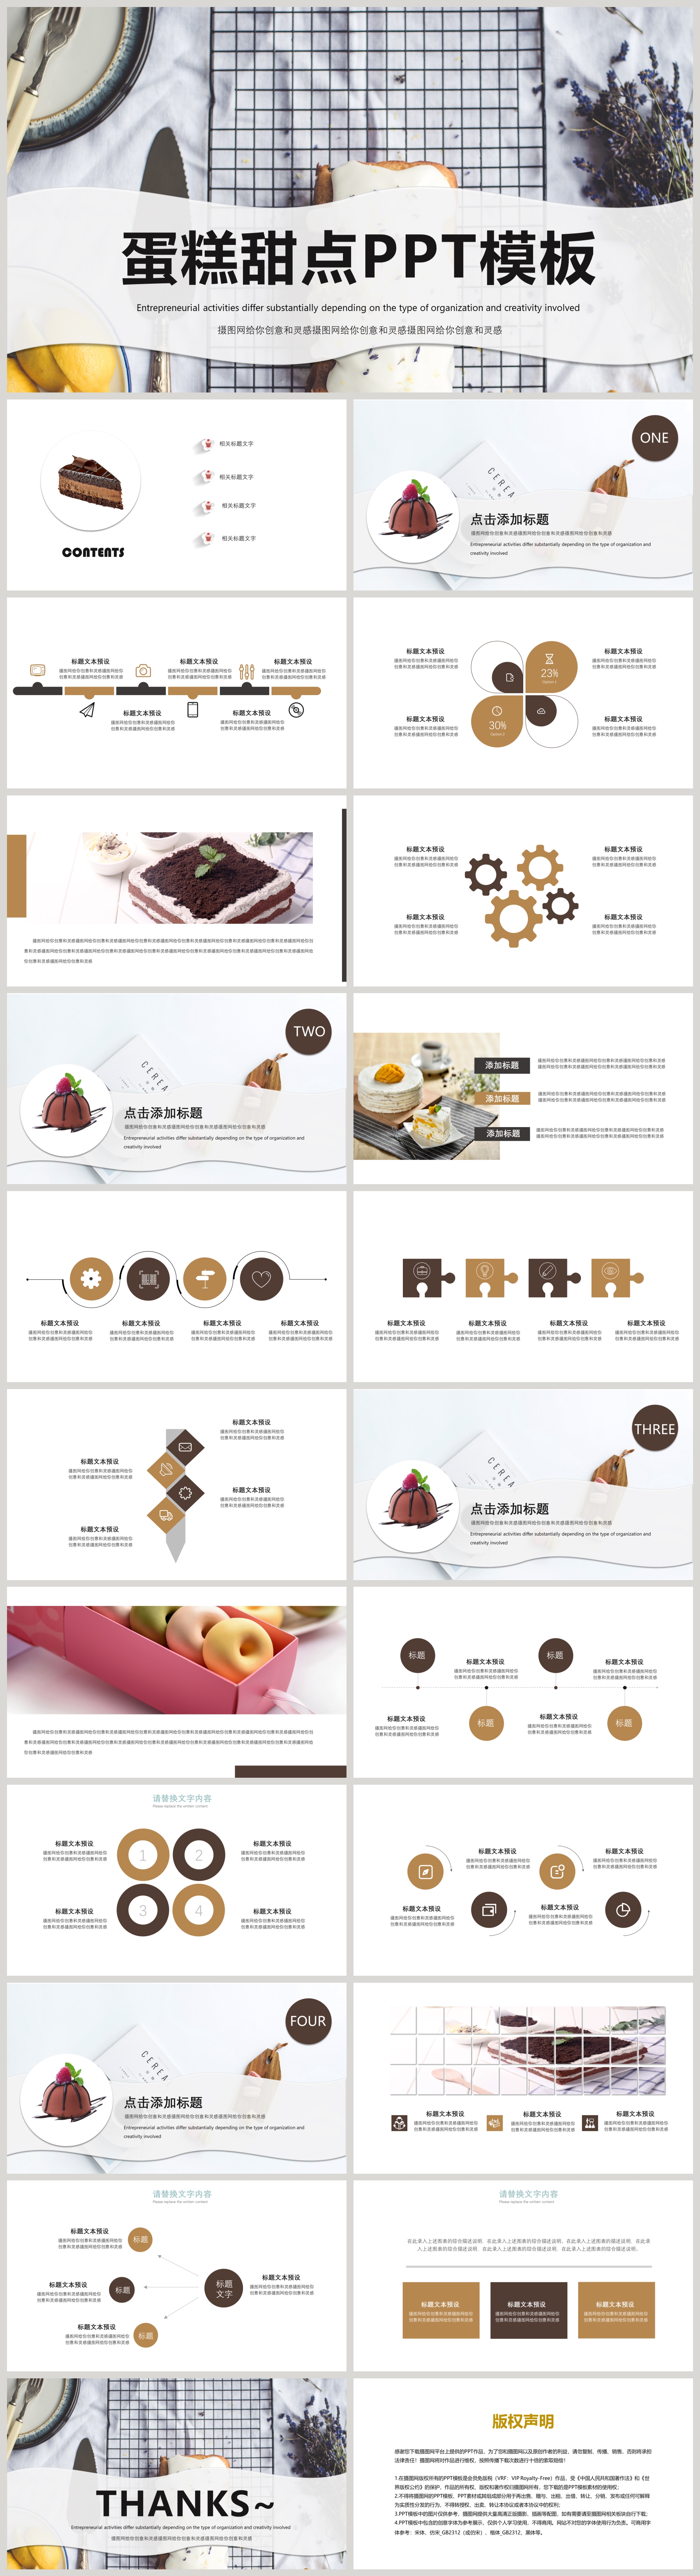 A cake with fruit and nuts on a plate PowerPoint Template, Backgrounds &  Google Slides - ID 0000594831 - SmileTemplates.com